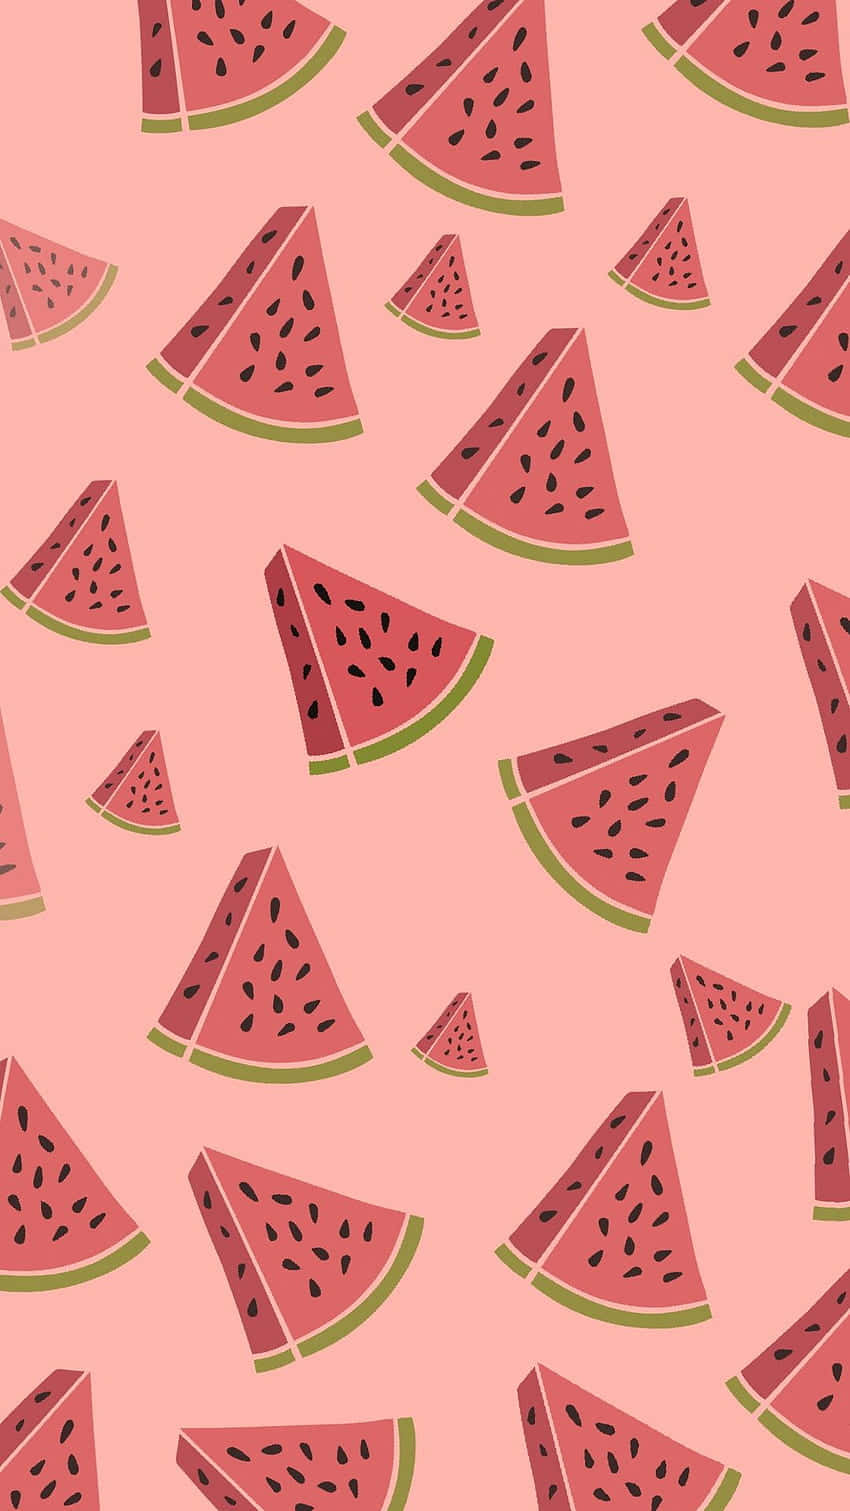 Feel the sweetness with this delicious Watermelon Iphone! Wallpaper